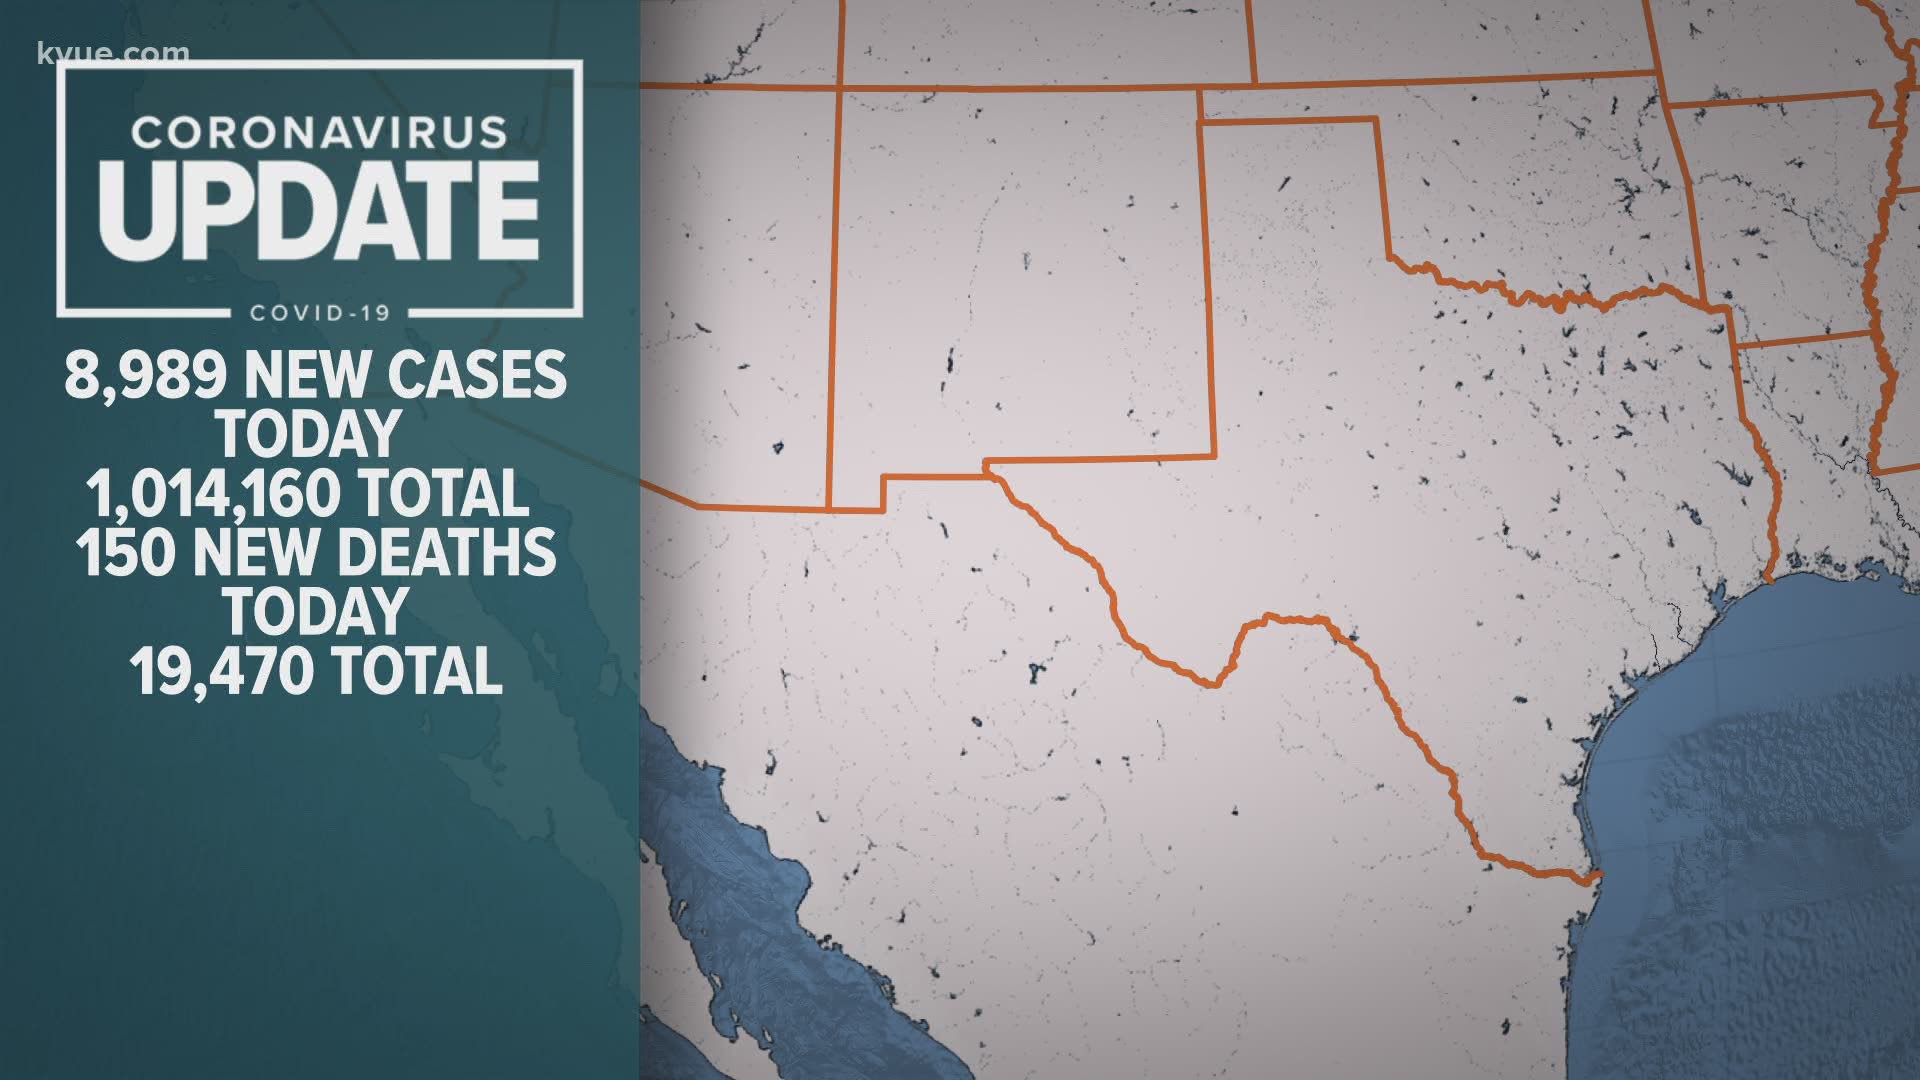 Here is what you need to know about the coronavirus pandemic for Nov. 14.